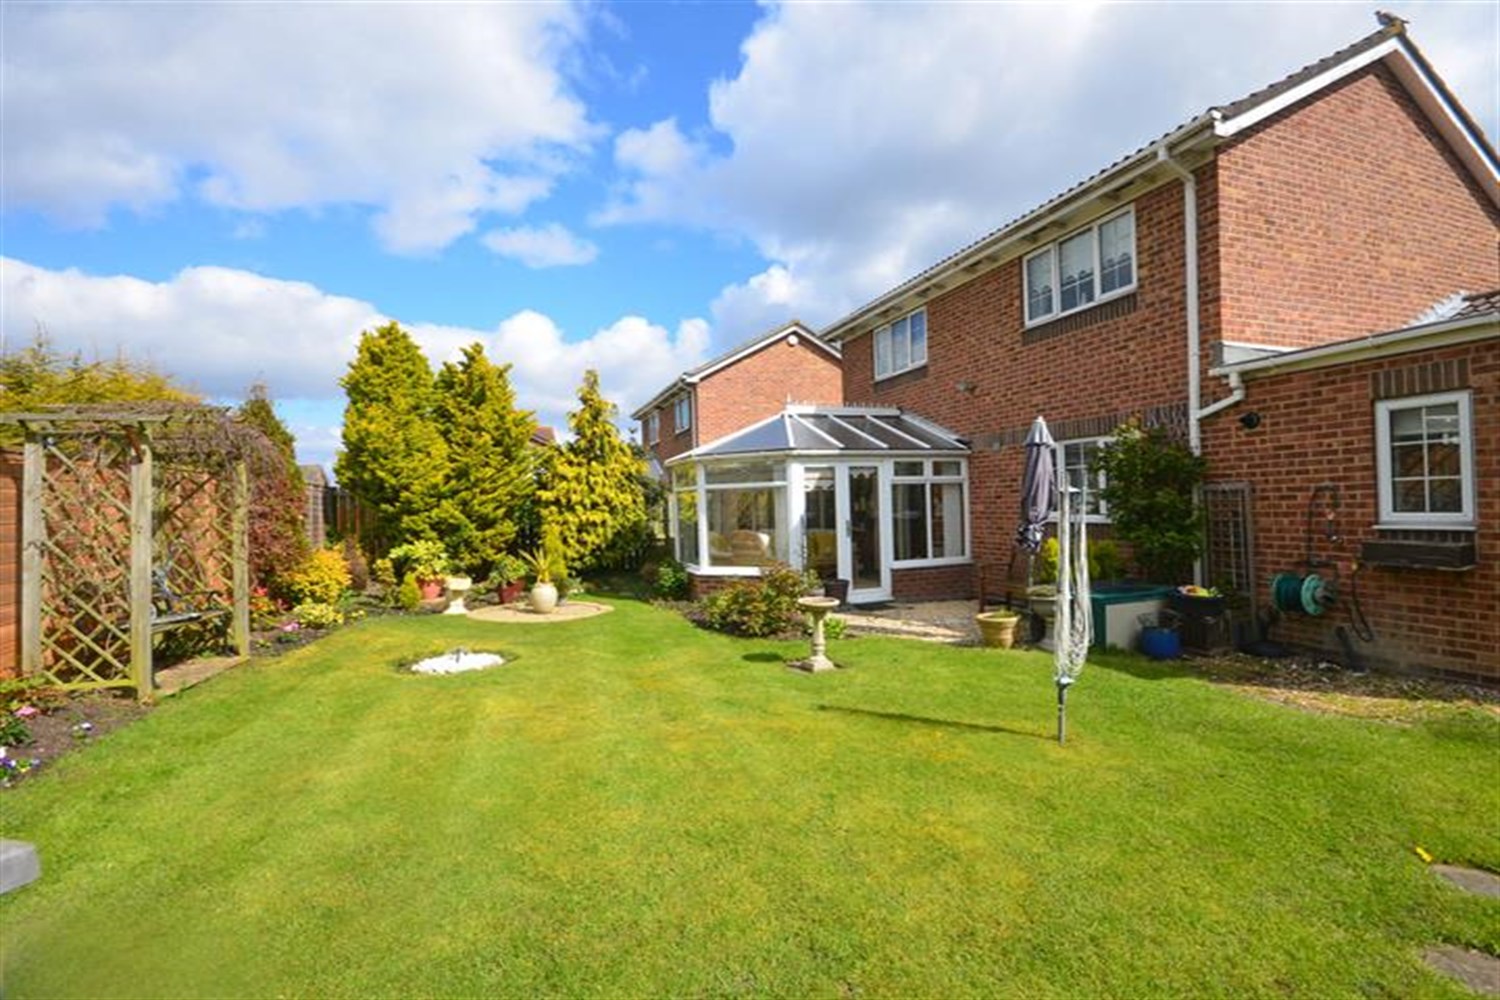 3 bed detached house for sale in The Cotswolds, Boldon Colliery - Property Image 1